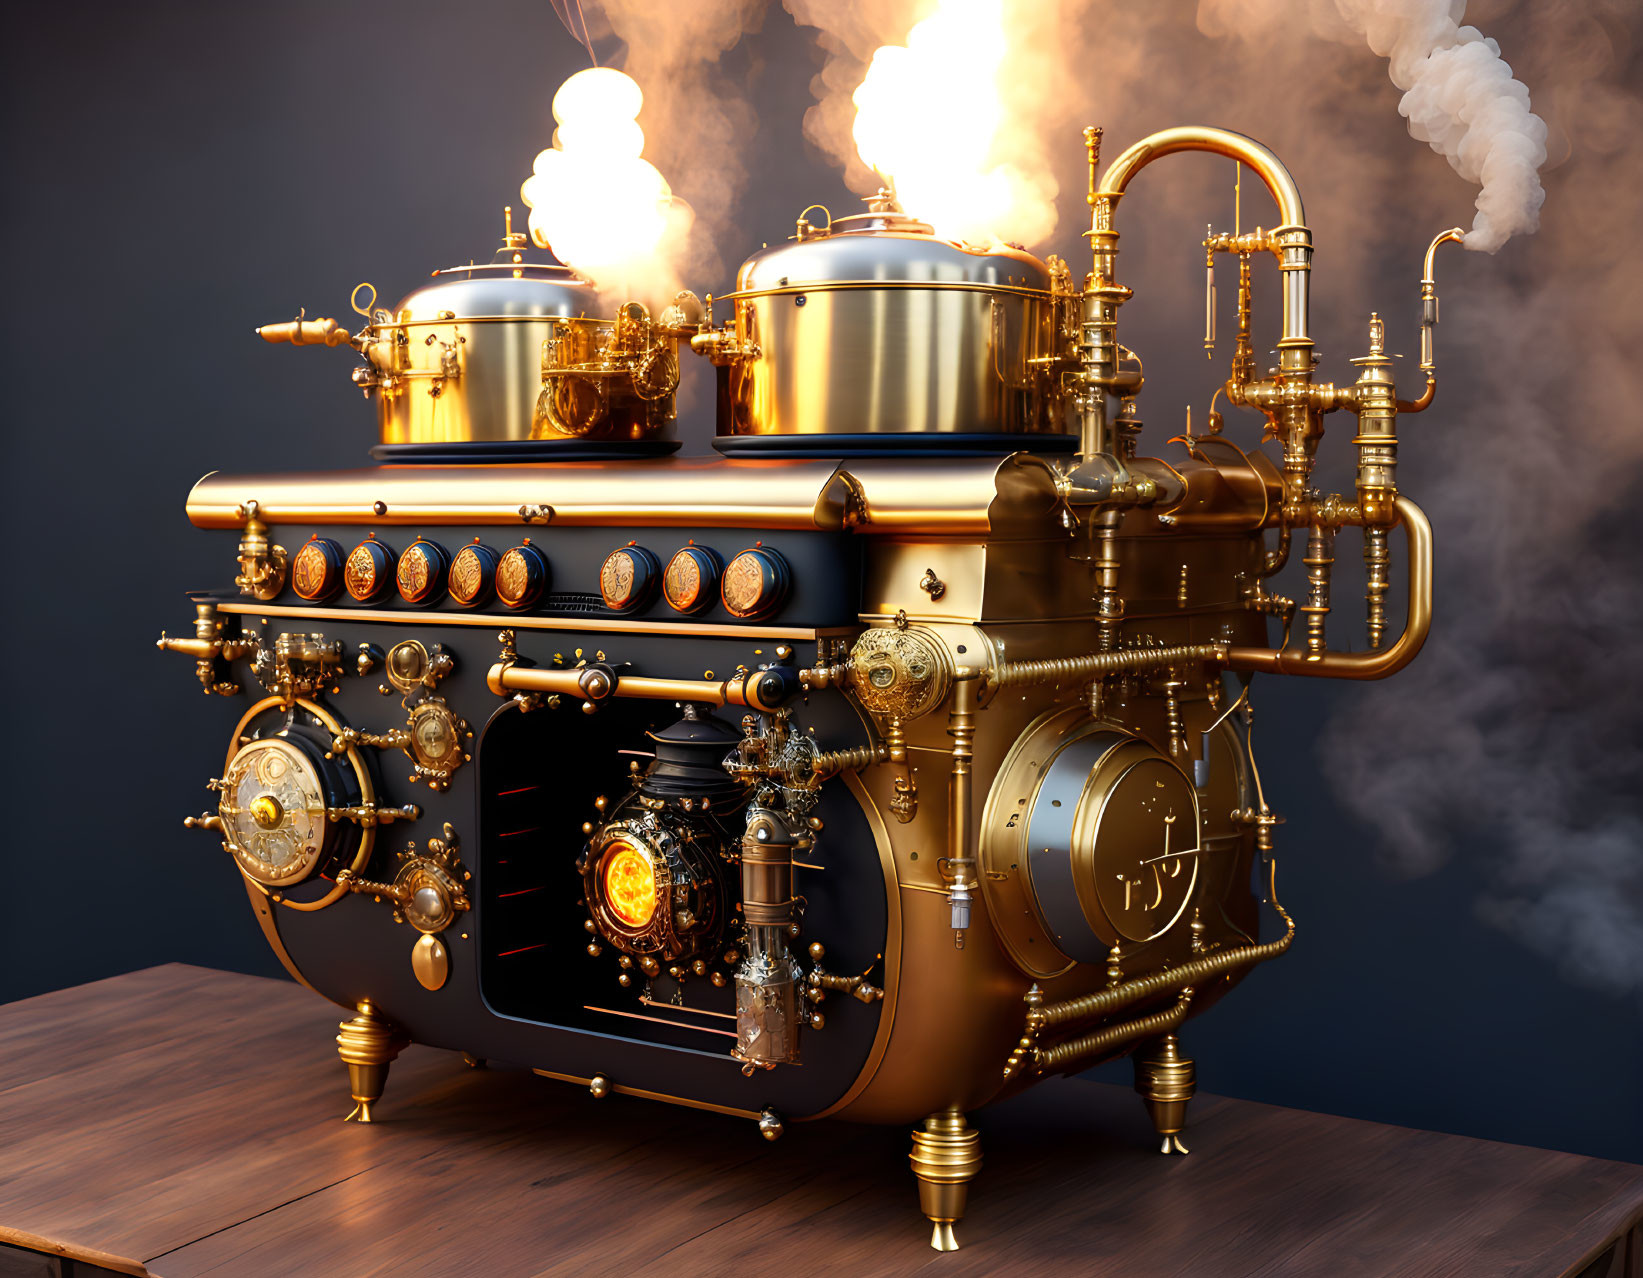 Steampunk-style machine with brass pots and pipes on wooden surface